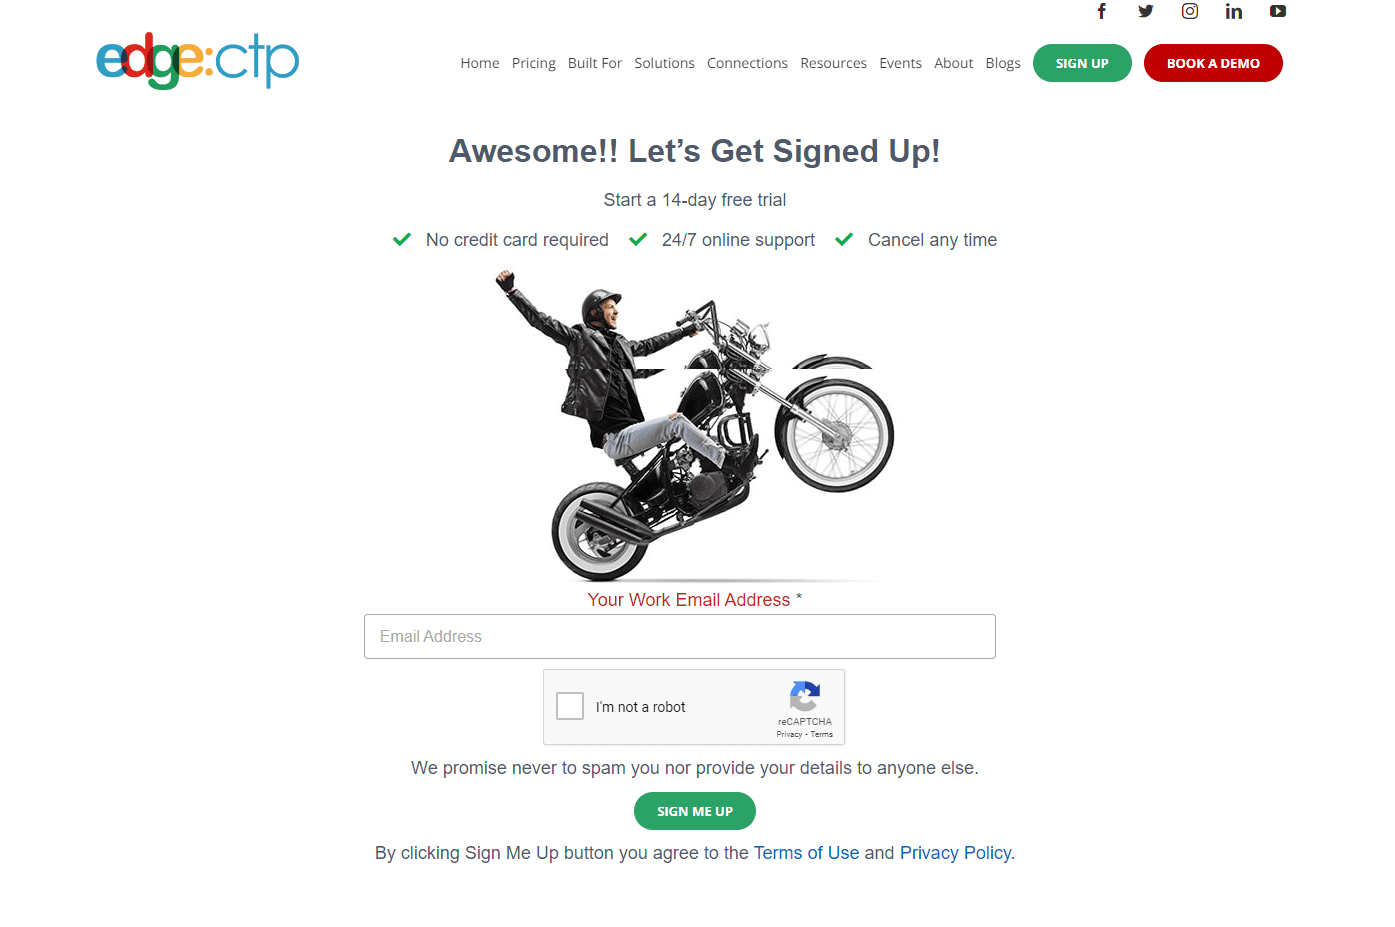 Signing-Up to EdgeCTP